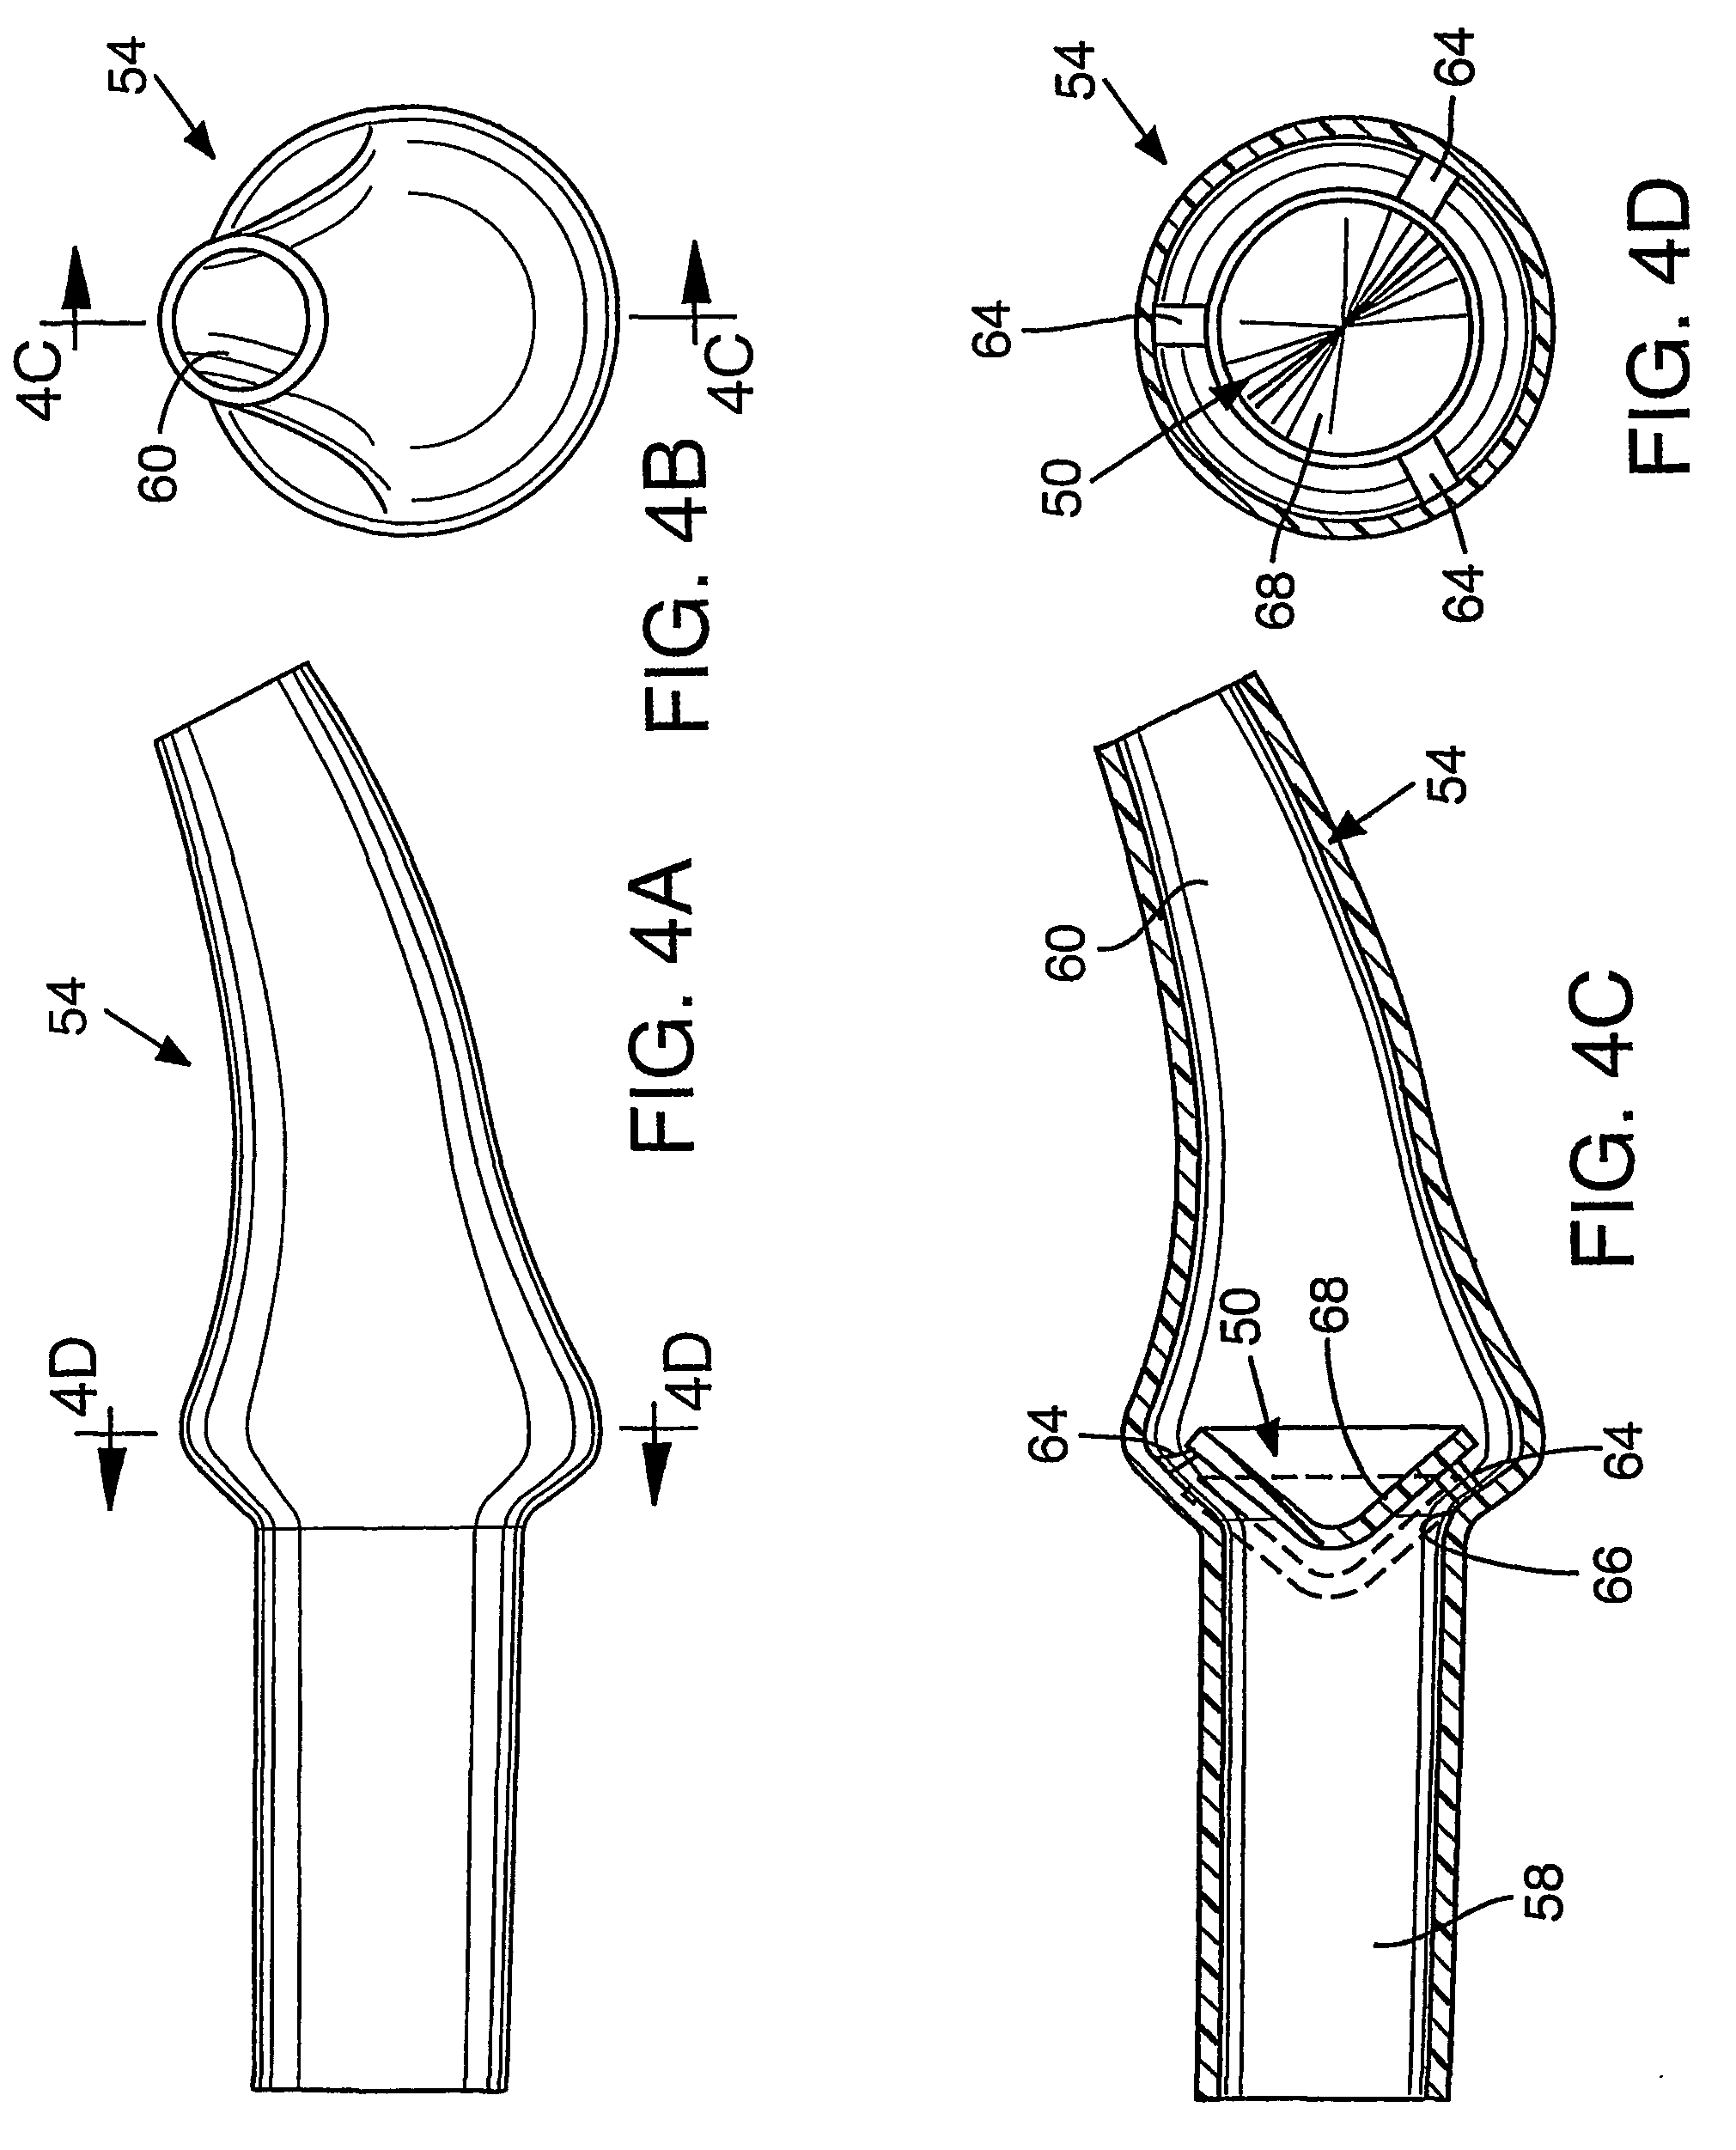 Systems and methods for aerosol delivery of agents